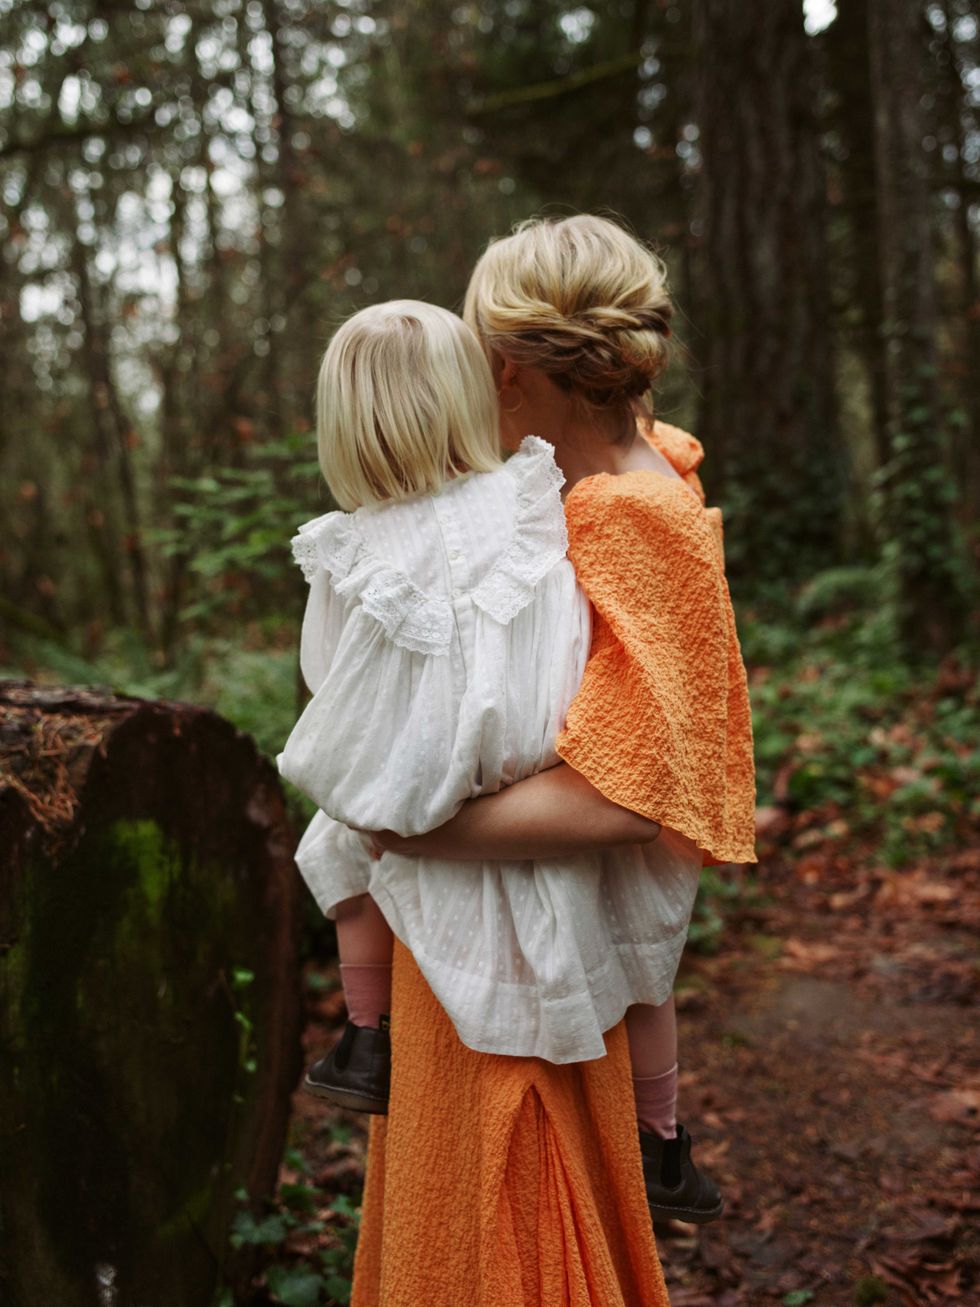 People in nature, Photograph, Photography, Forest, Shoulder, Romance, Dress, Woodland, Peach, Love, 